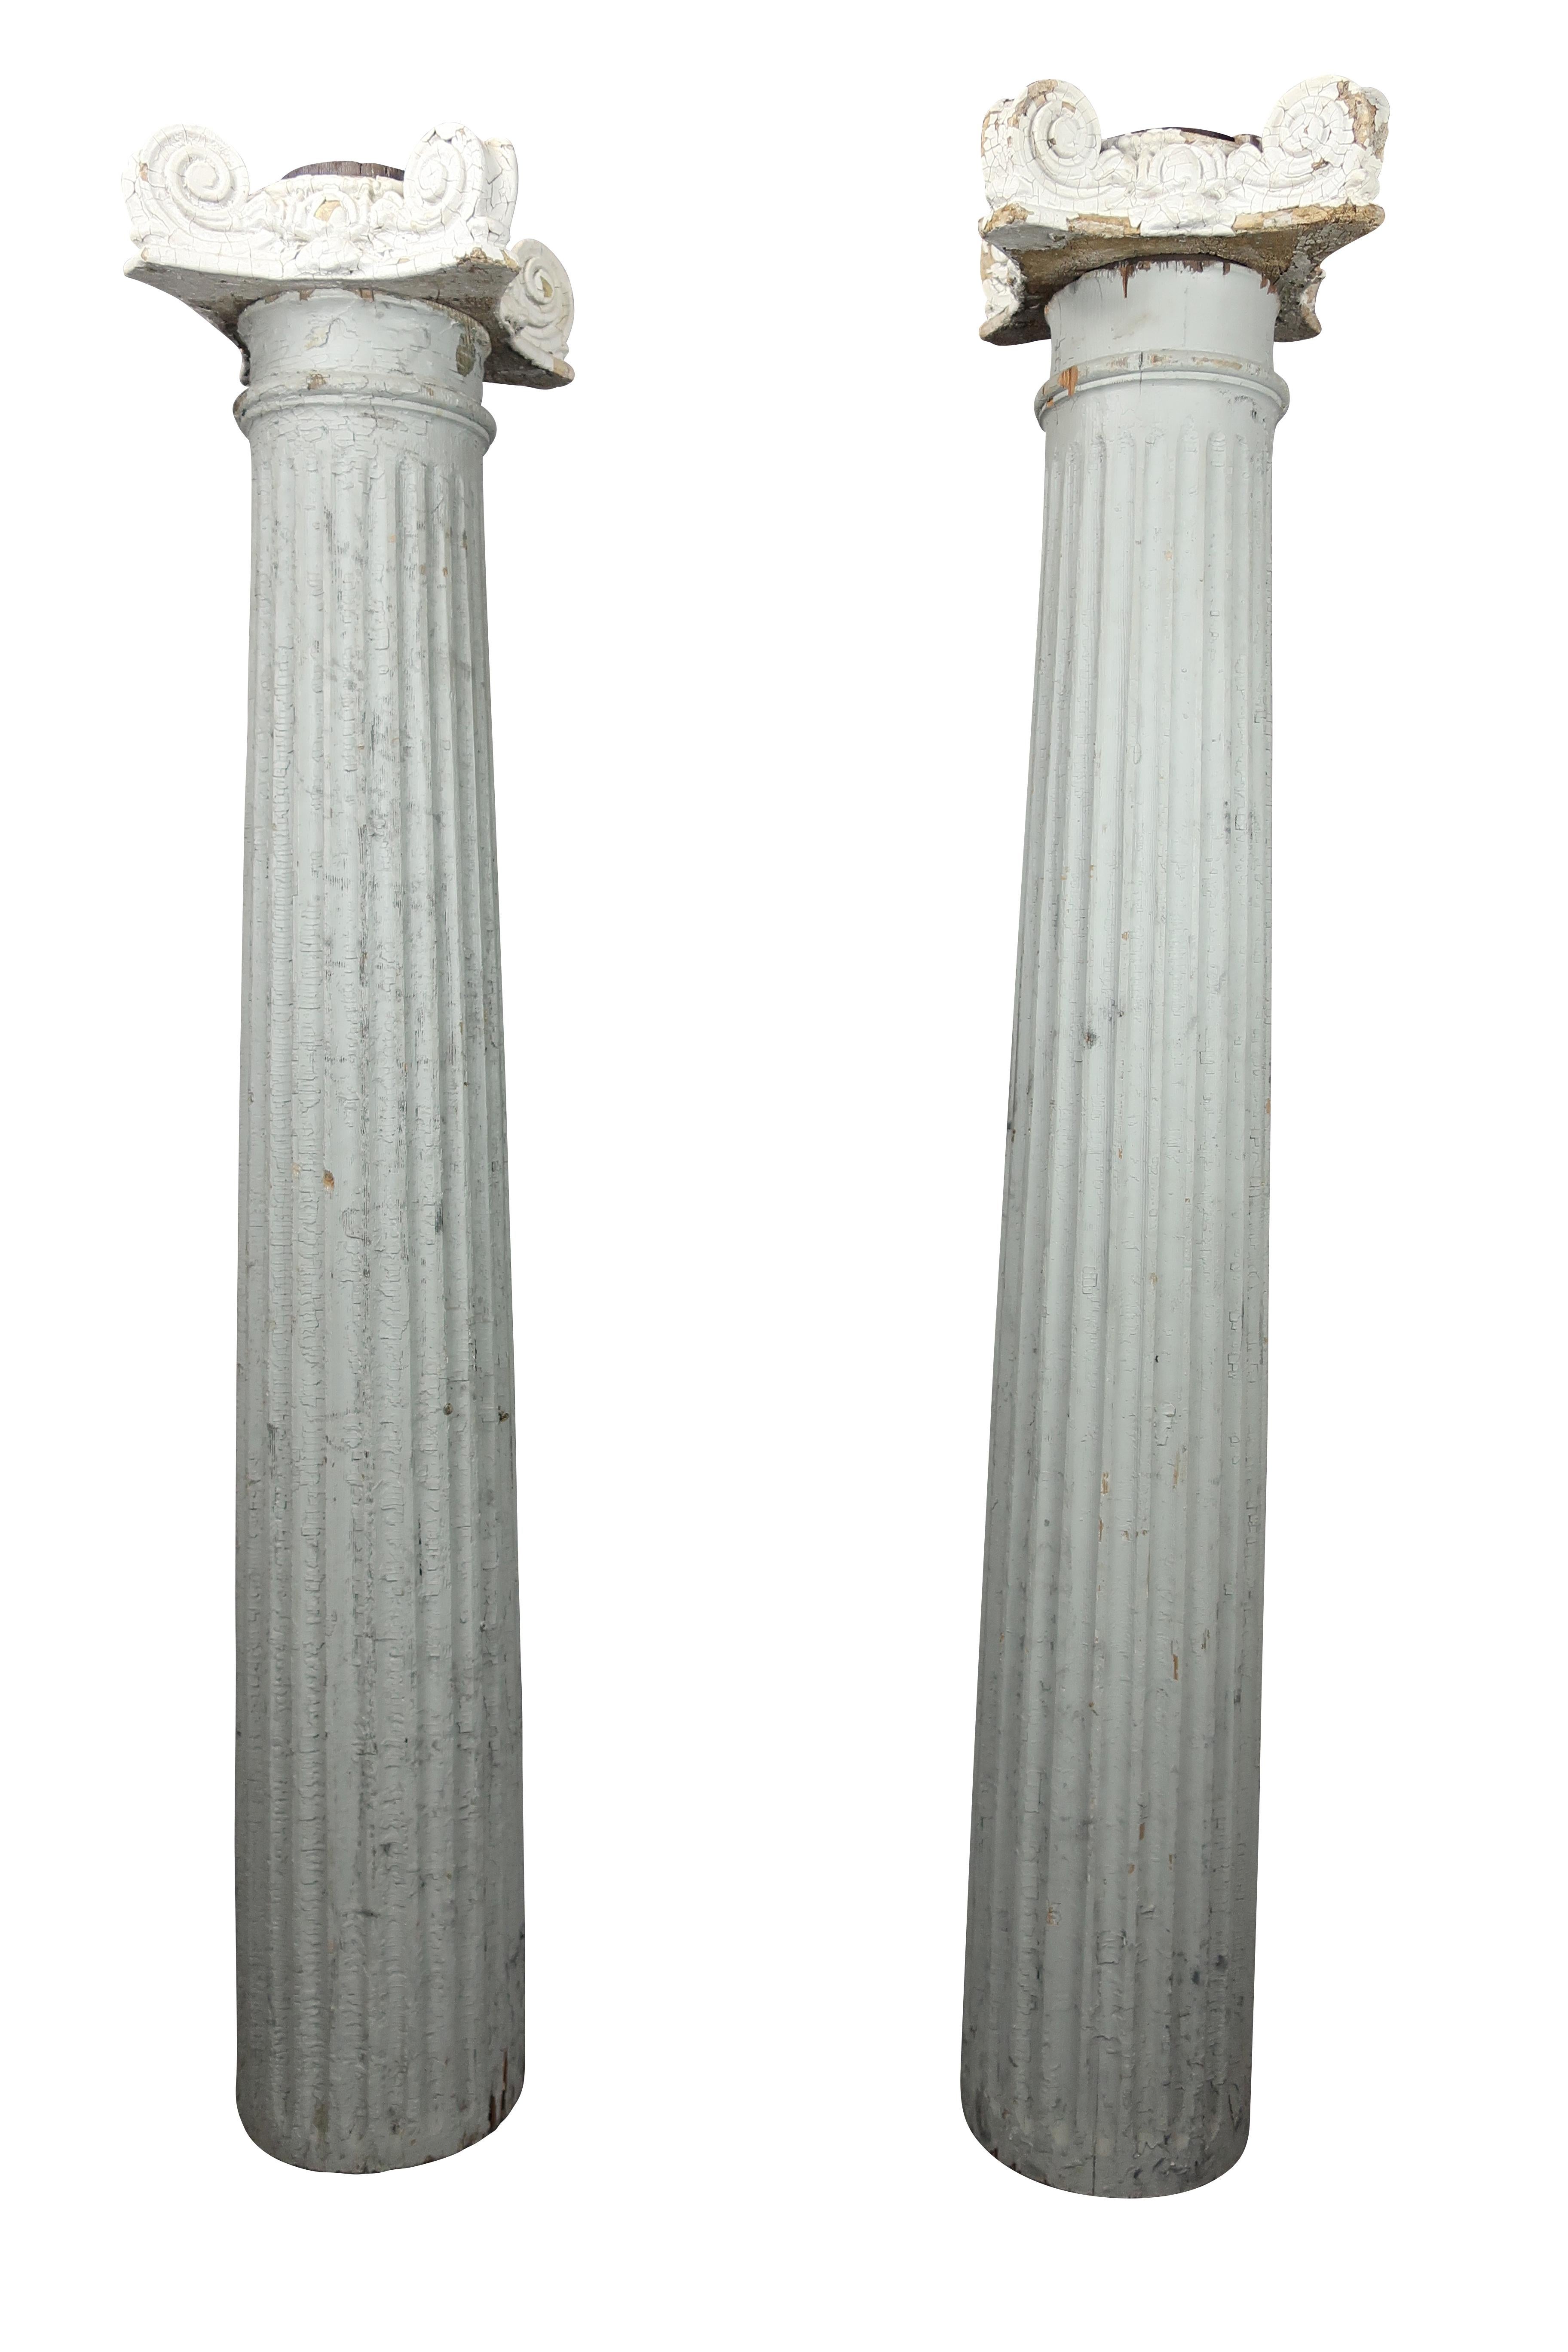 Pair of Painted Grey and White Wood Columns with Ionic Plaster and Wood Capitals 1